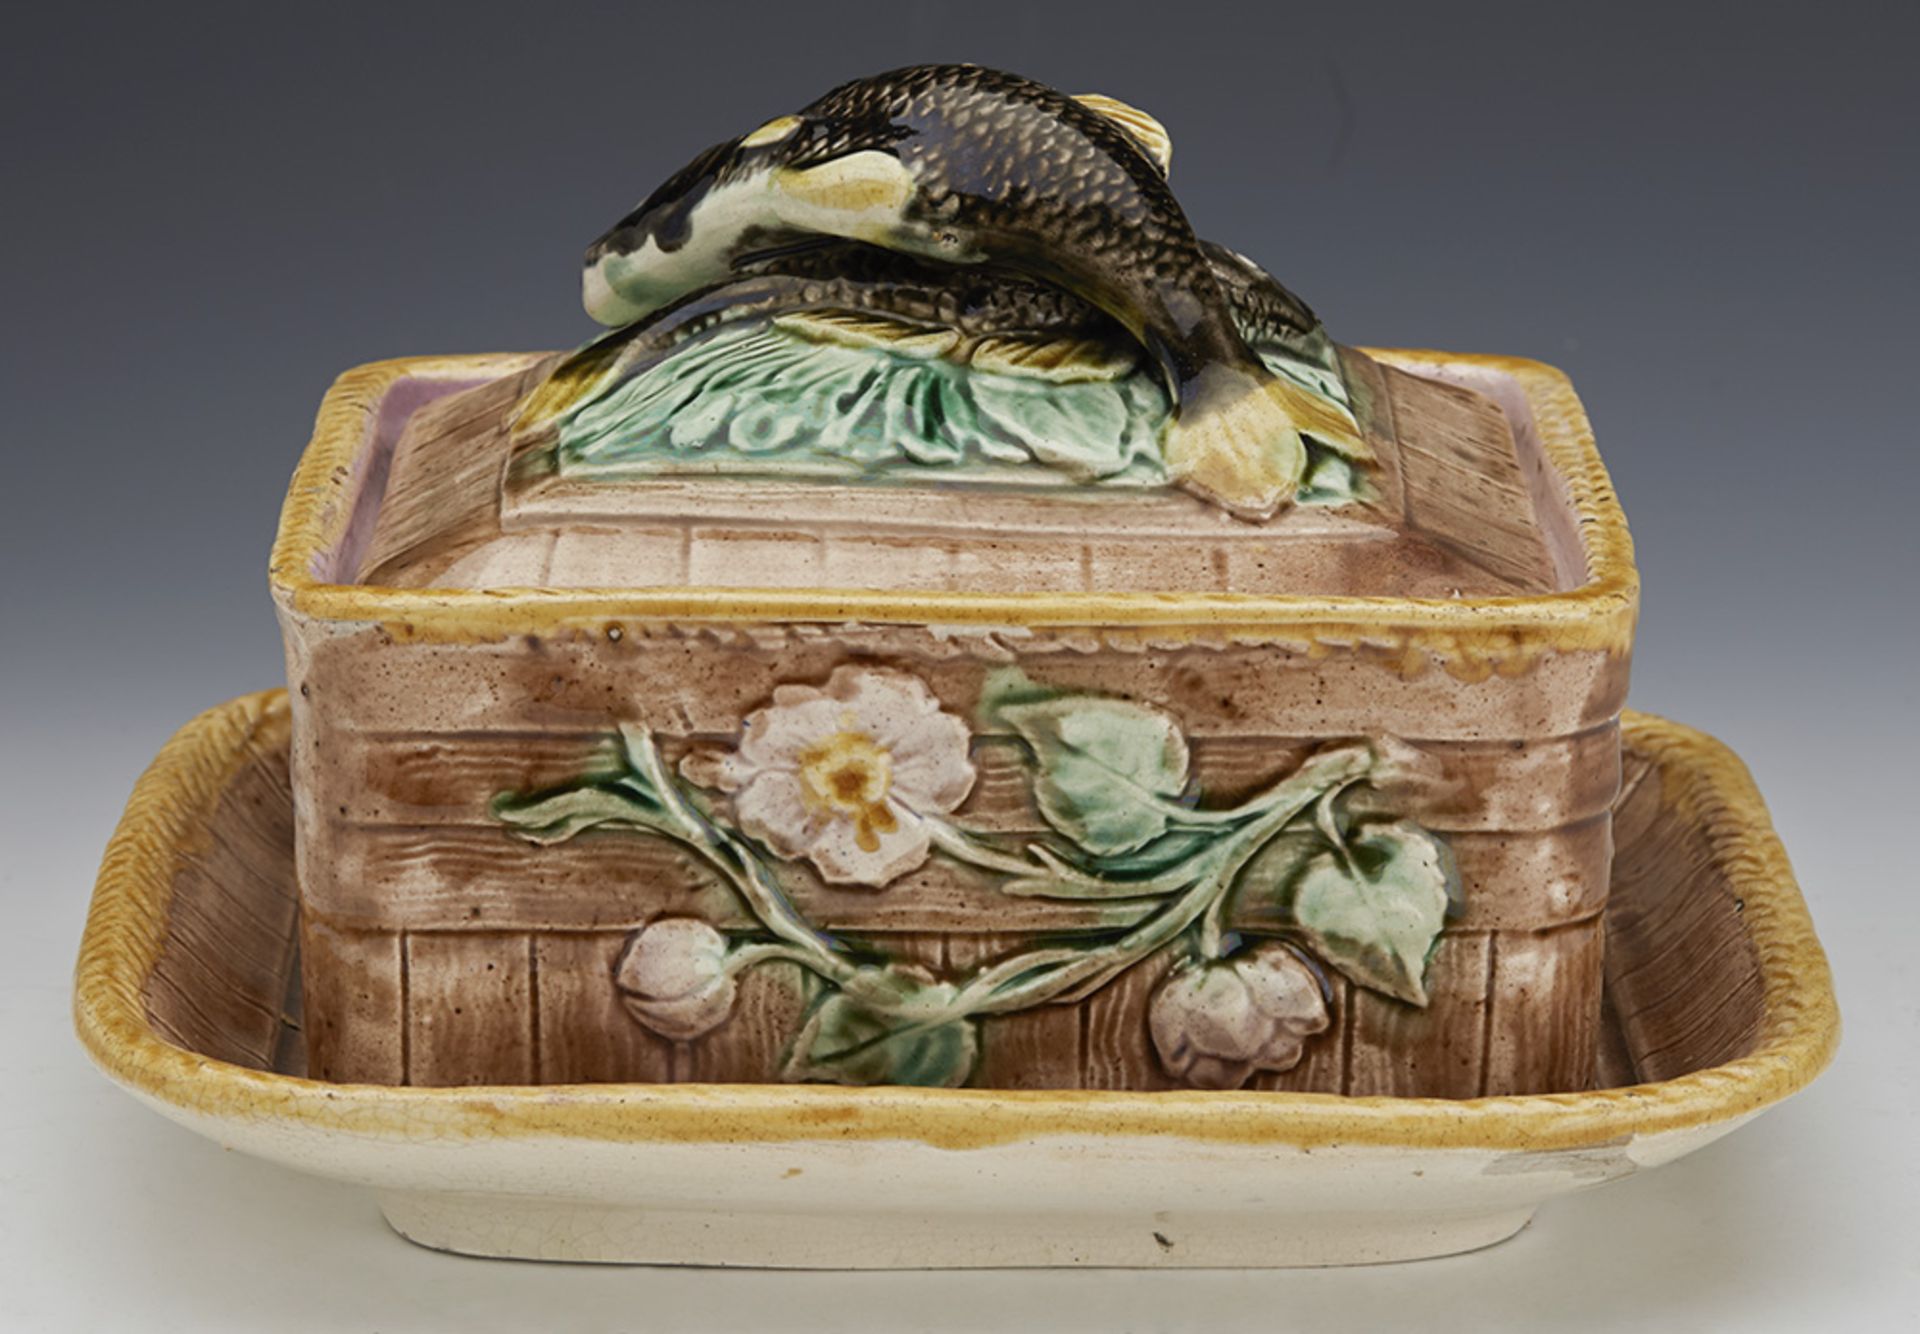 Antique English Majolica Sardine Dish With Fish And Flowers C.1865 - Image 10 of 10